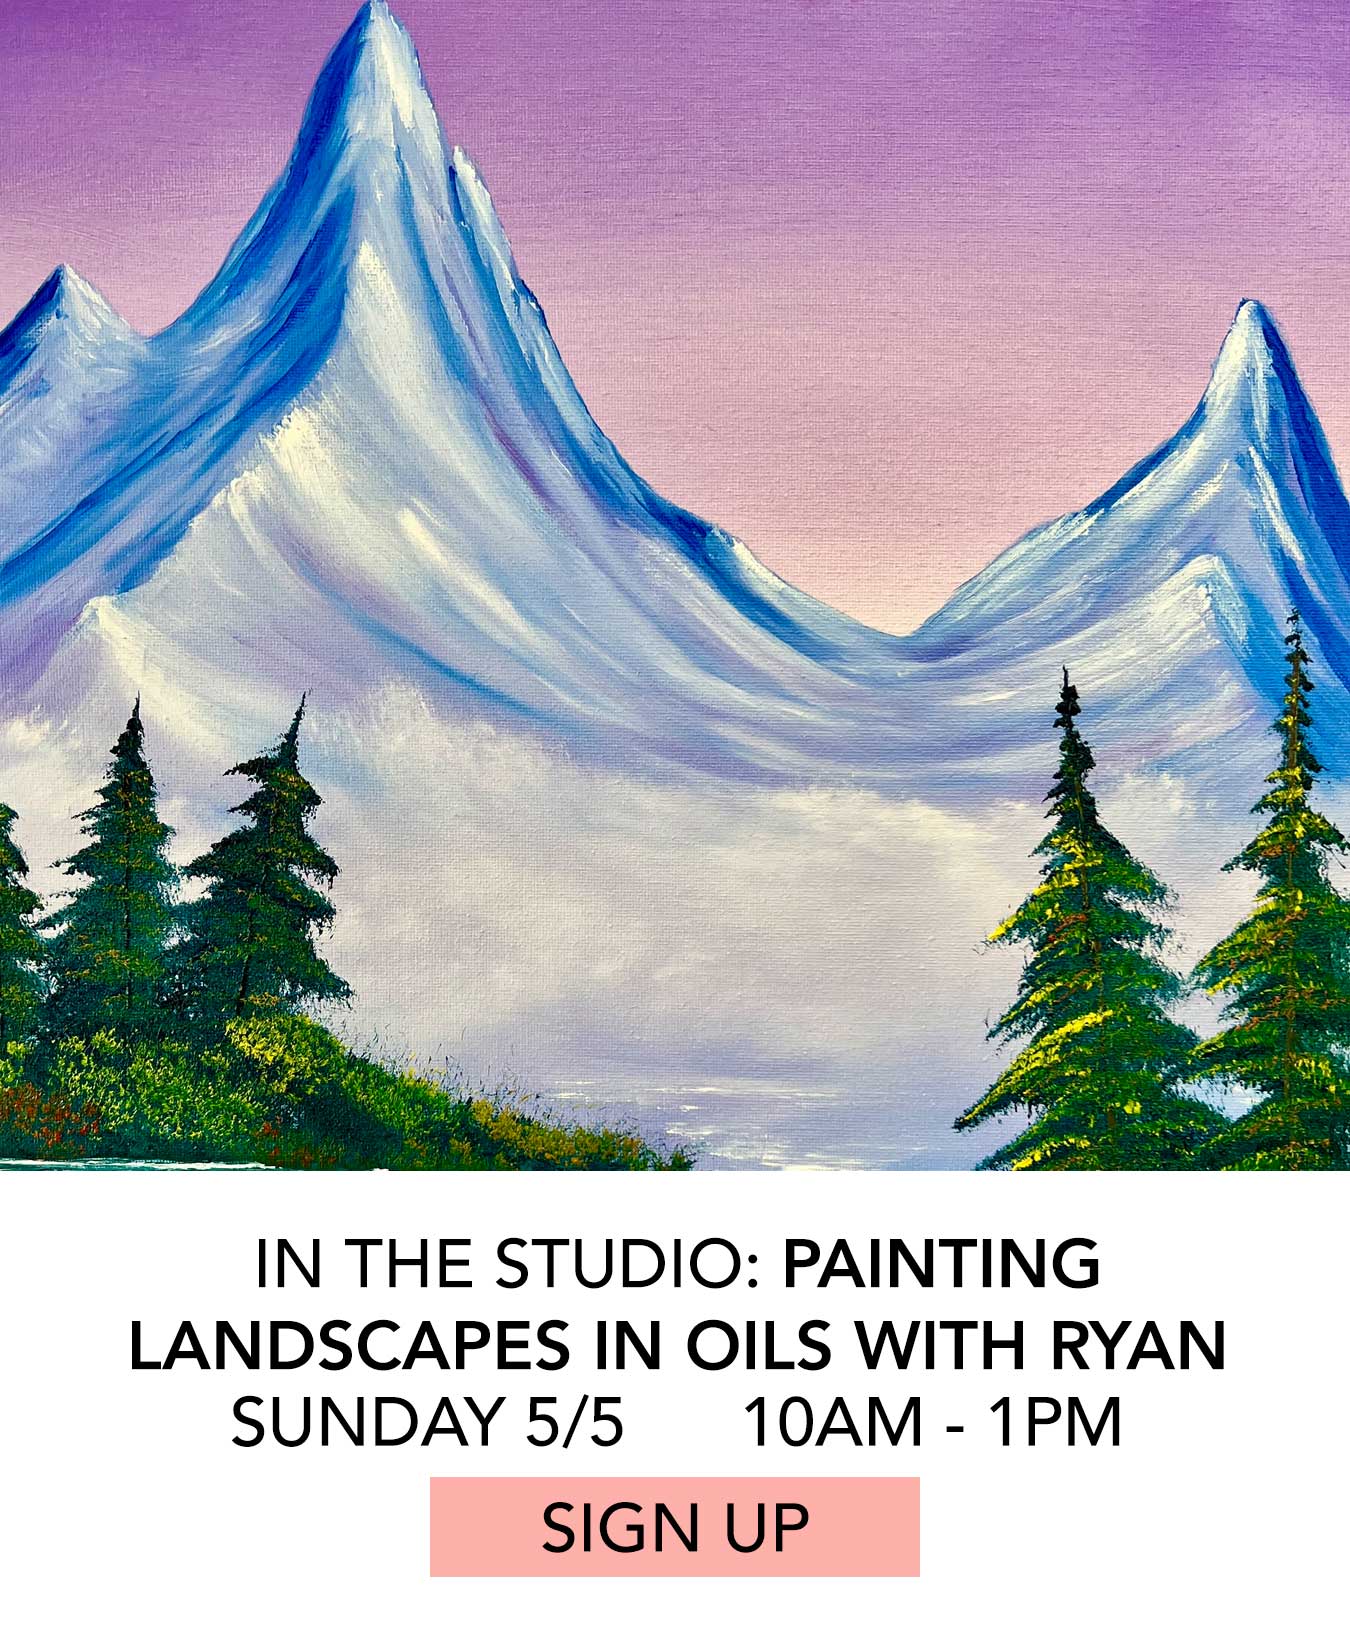 In the Studio: Painting Landscapes in Oils with Ryan. Sunday 5/5 from 10:00am to 1:00pm. Click to Sign Up.